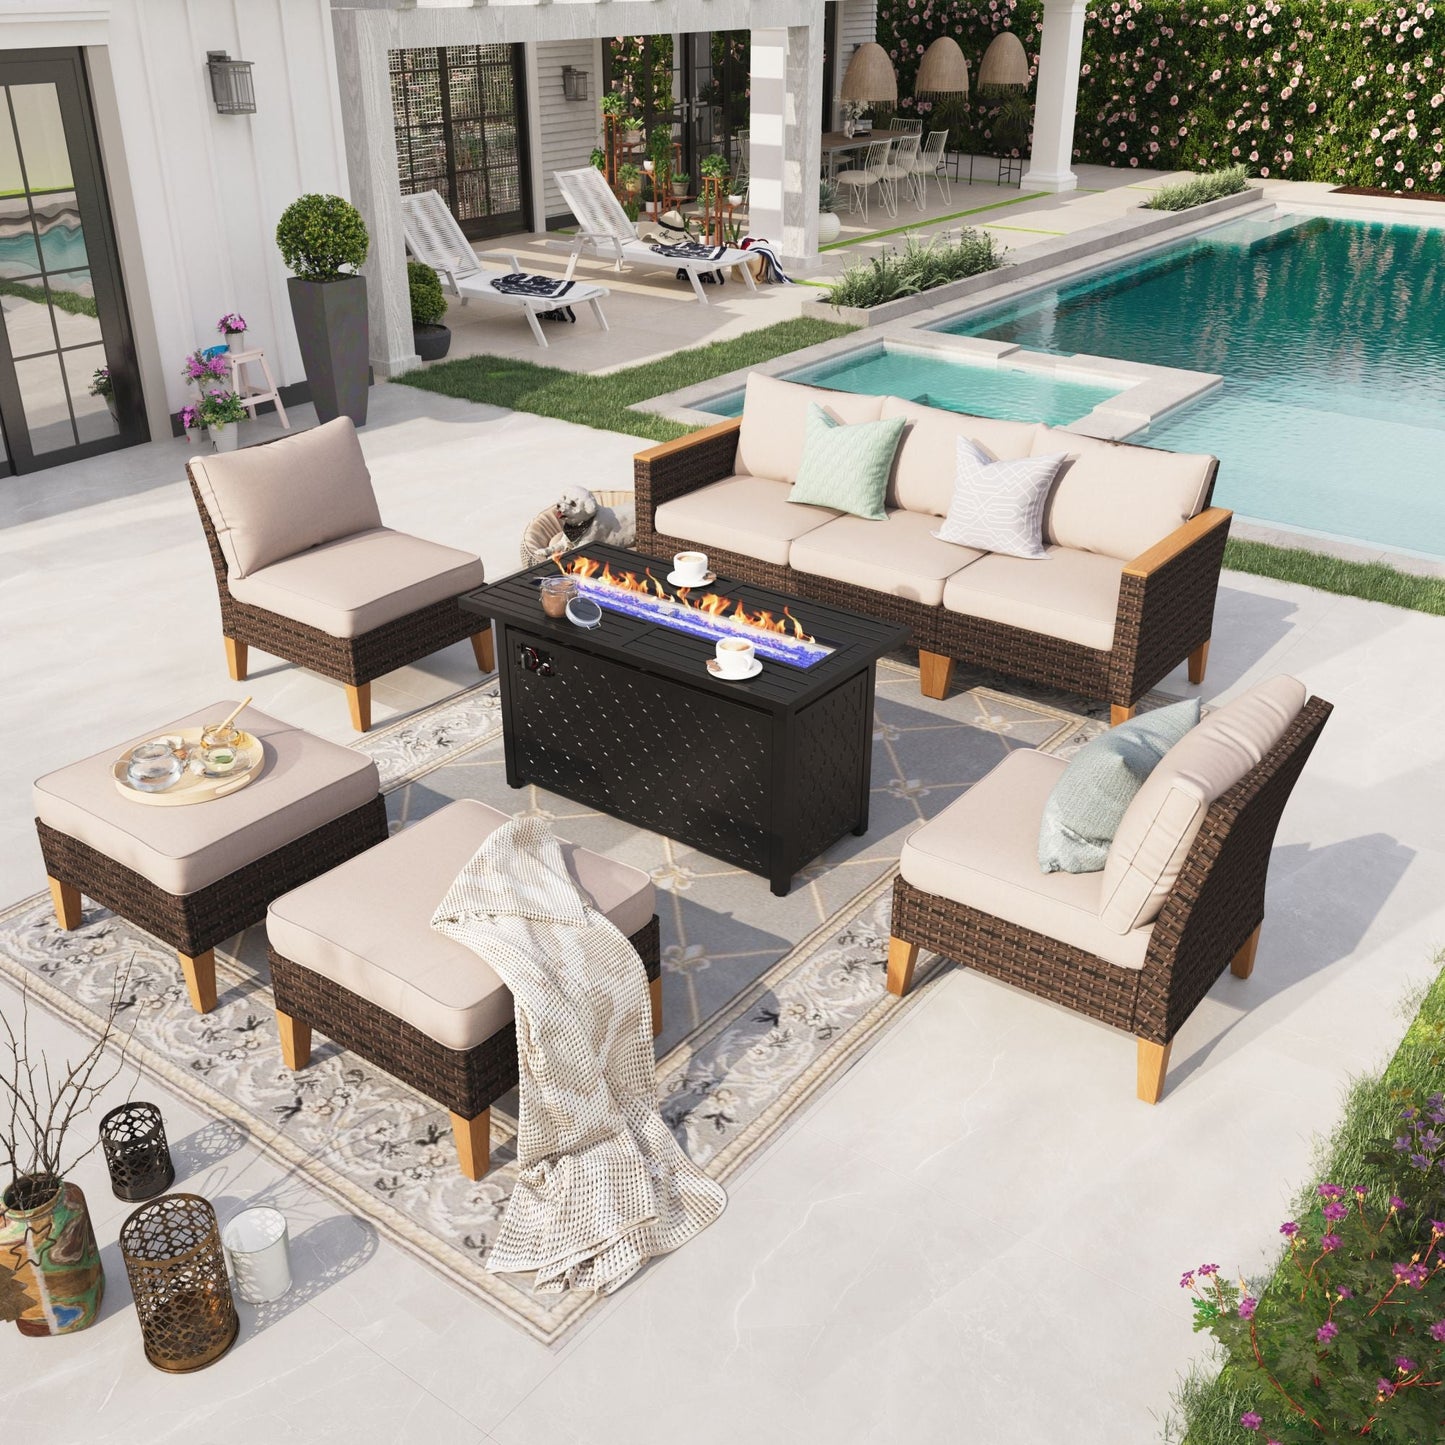 Sophia & William 8 Piece Outdoor Wicker Patio Conversation Sofa Set with Fire Pit Table